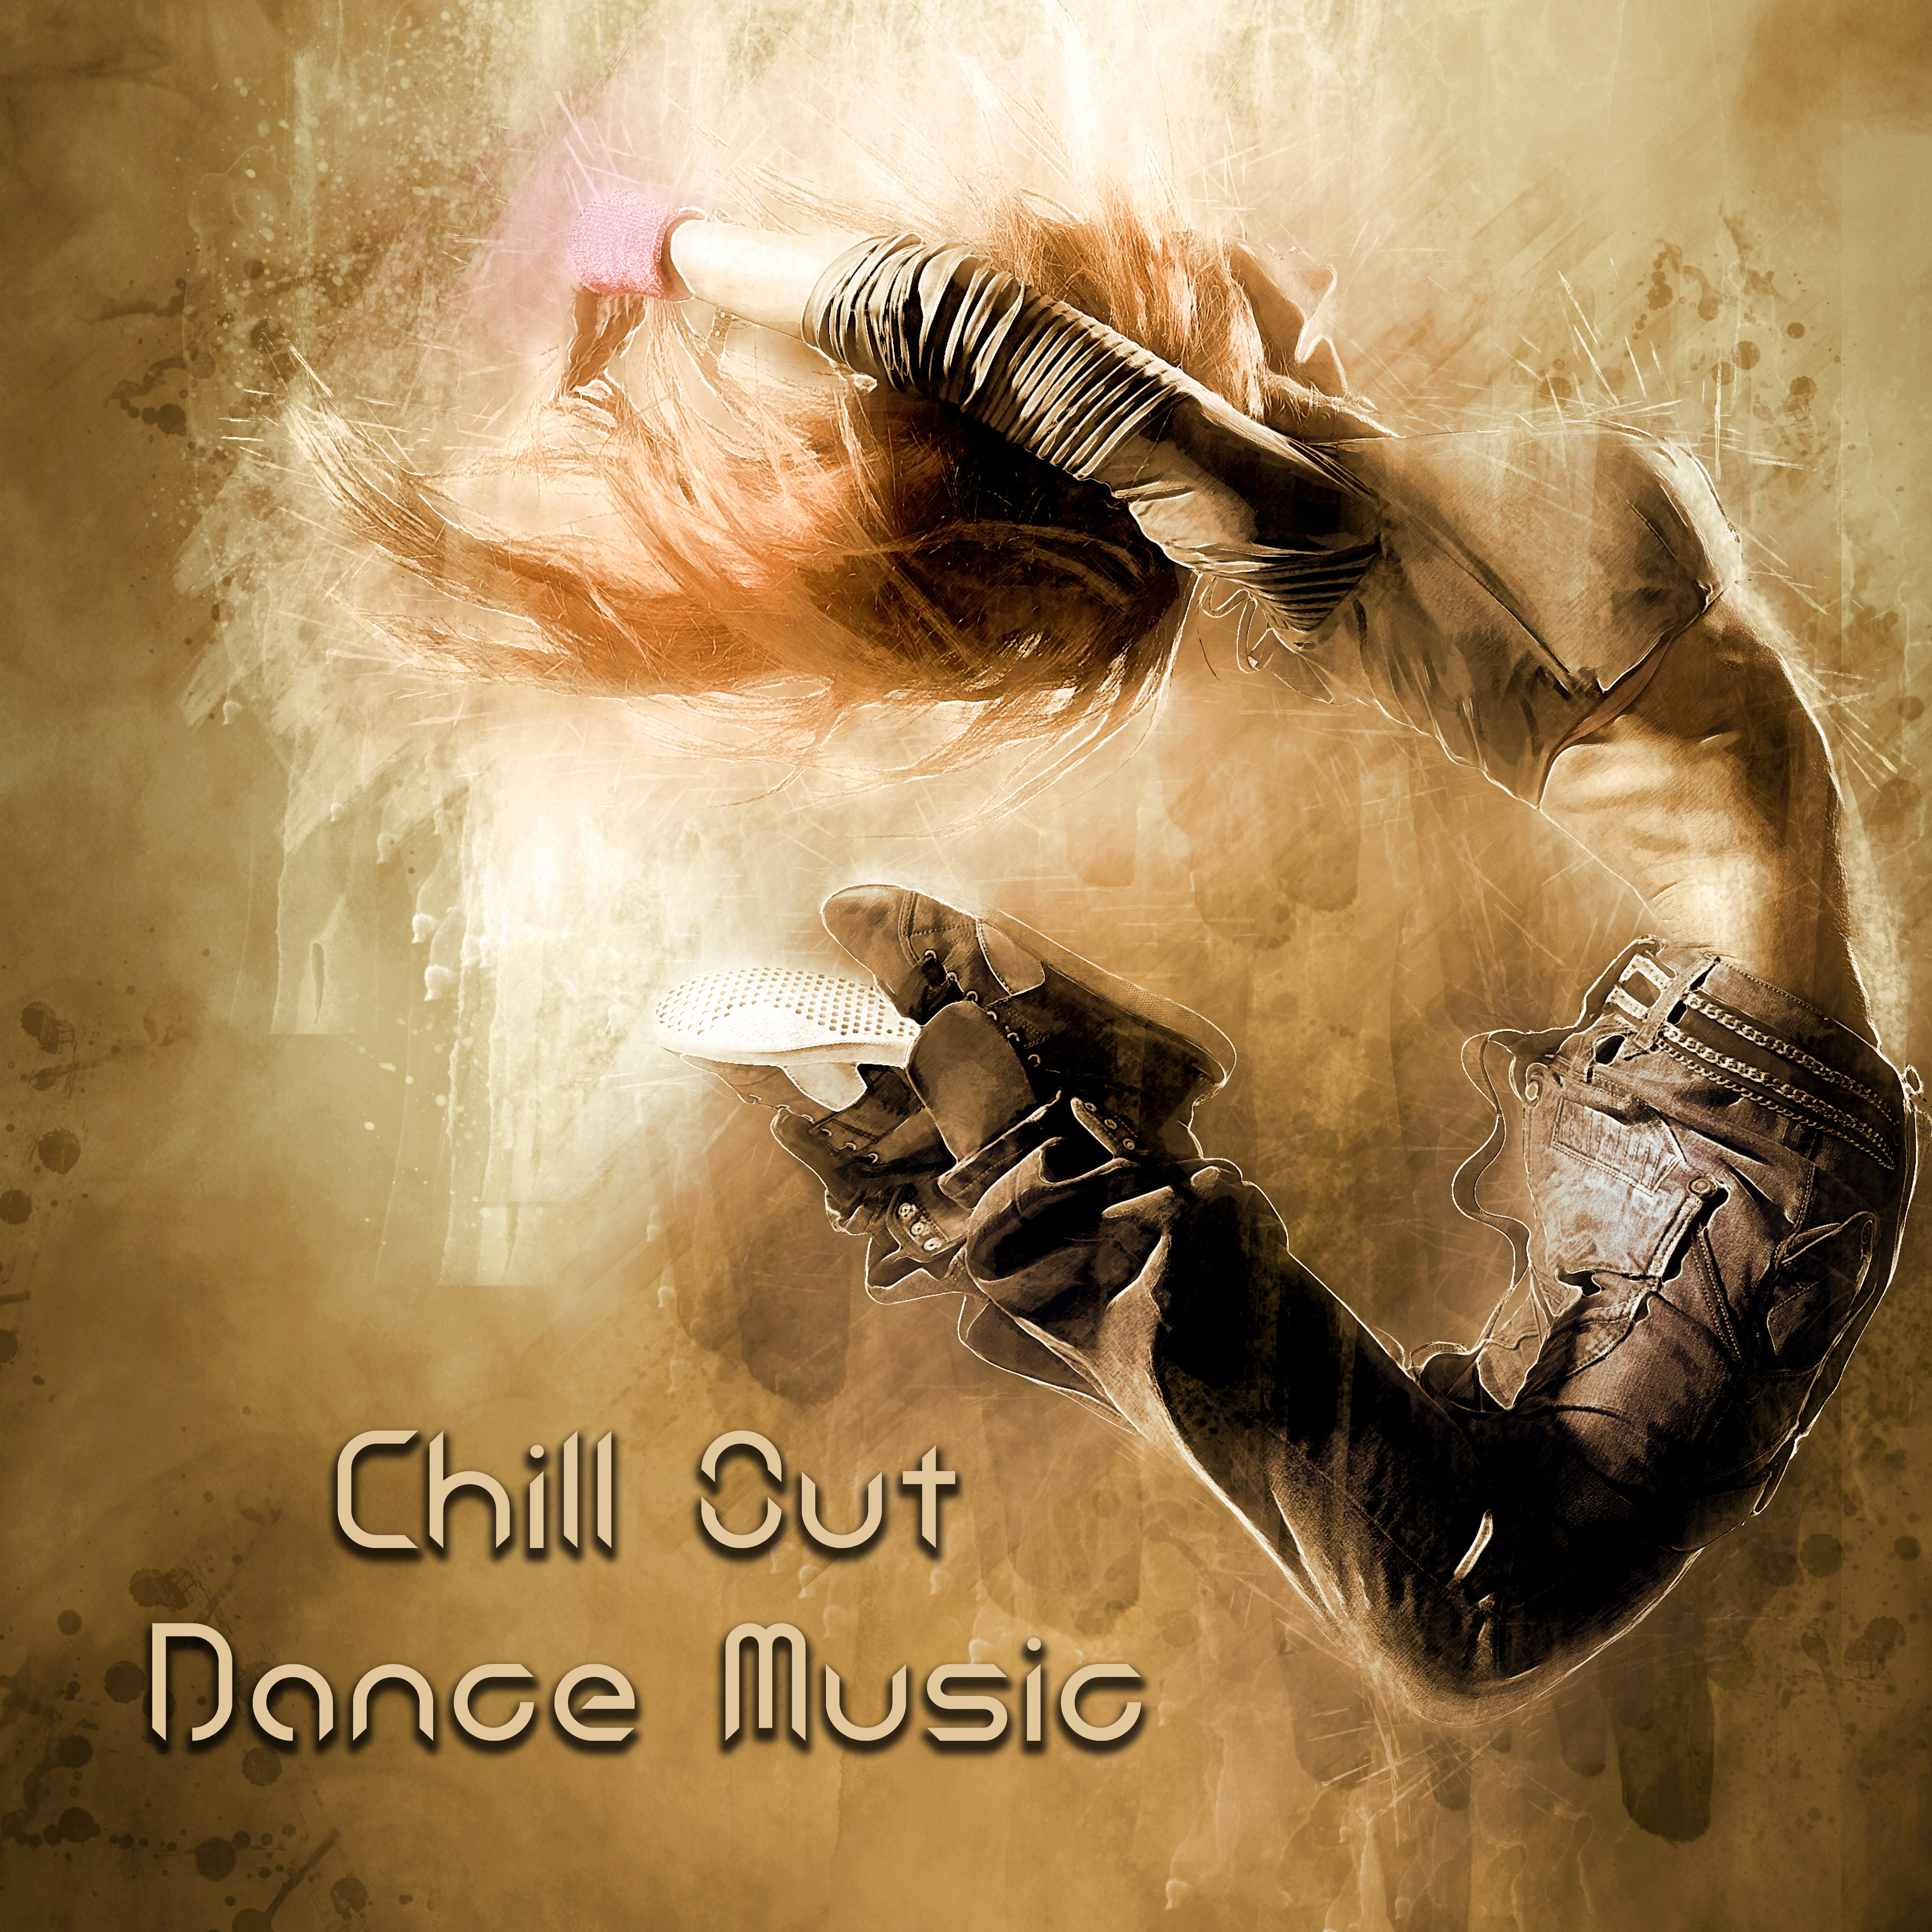 Chill Out Dance Music  Ibiza Party Time, Beach Dancefloor, Summer Sun, Holiday Chill Out Music